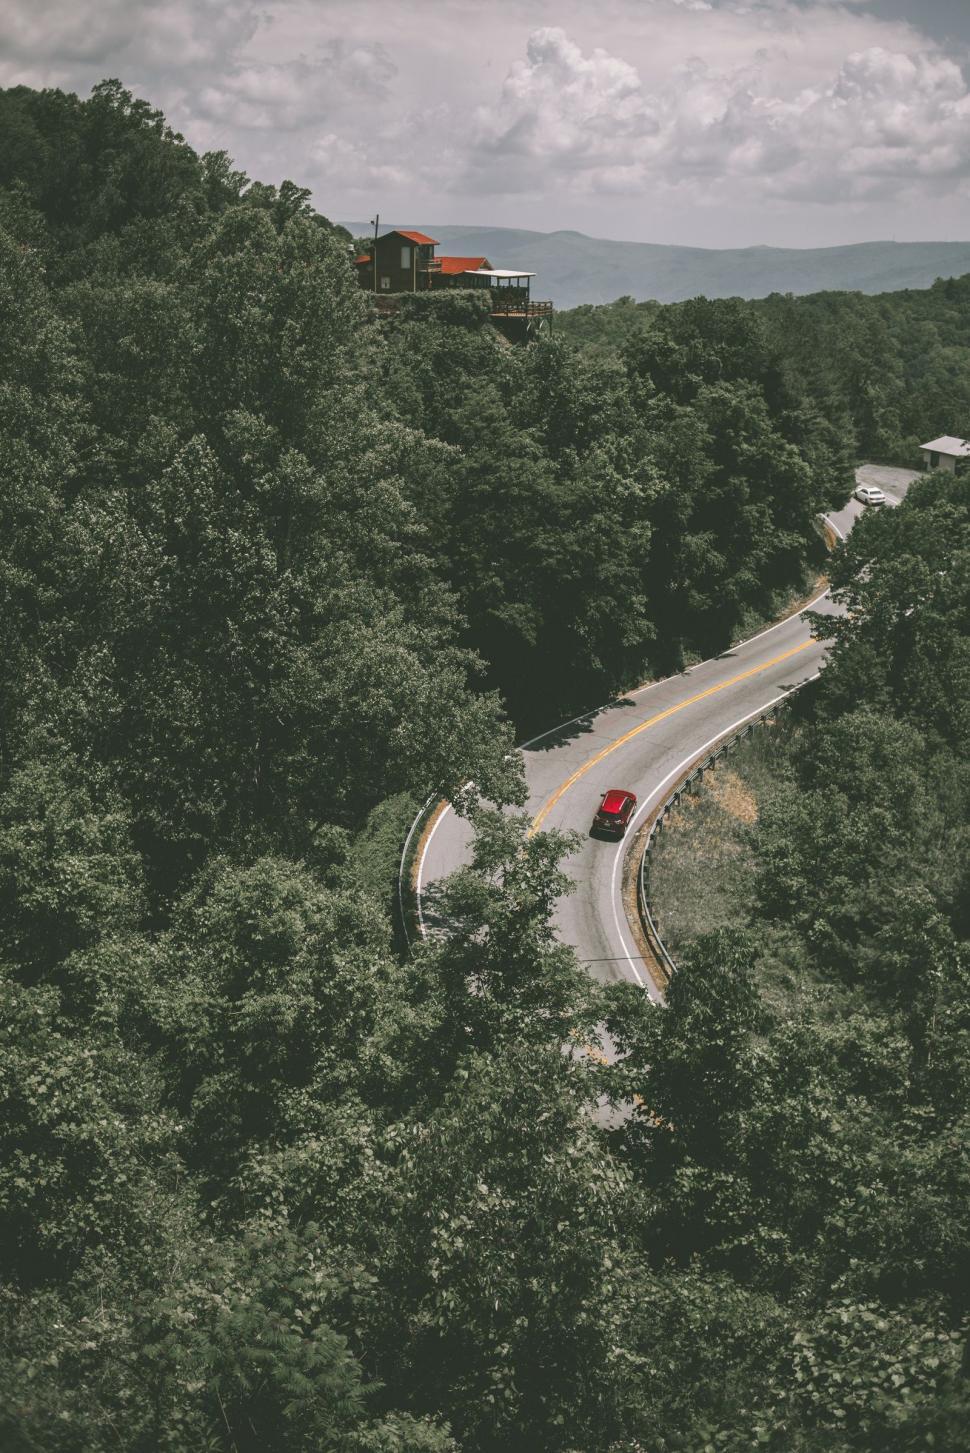 Free Image of Red Truck Driving on Curvy Road Surrounded by Trees 